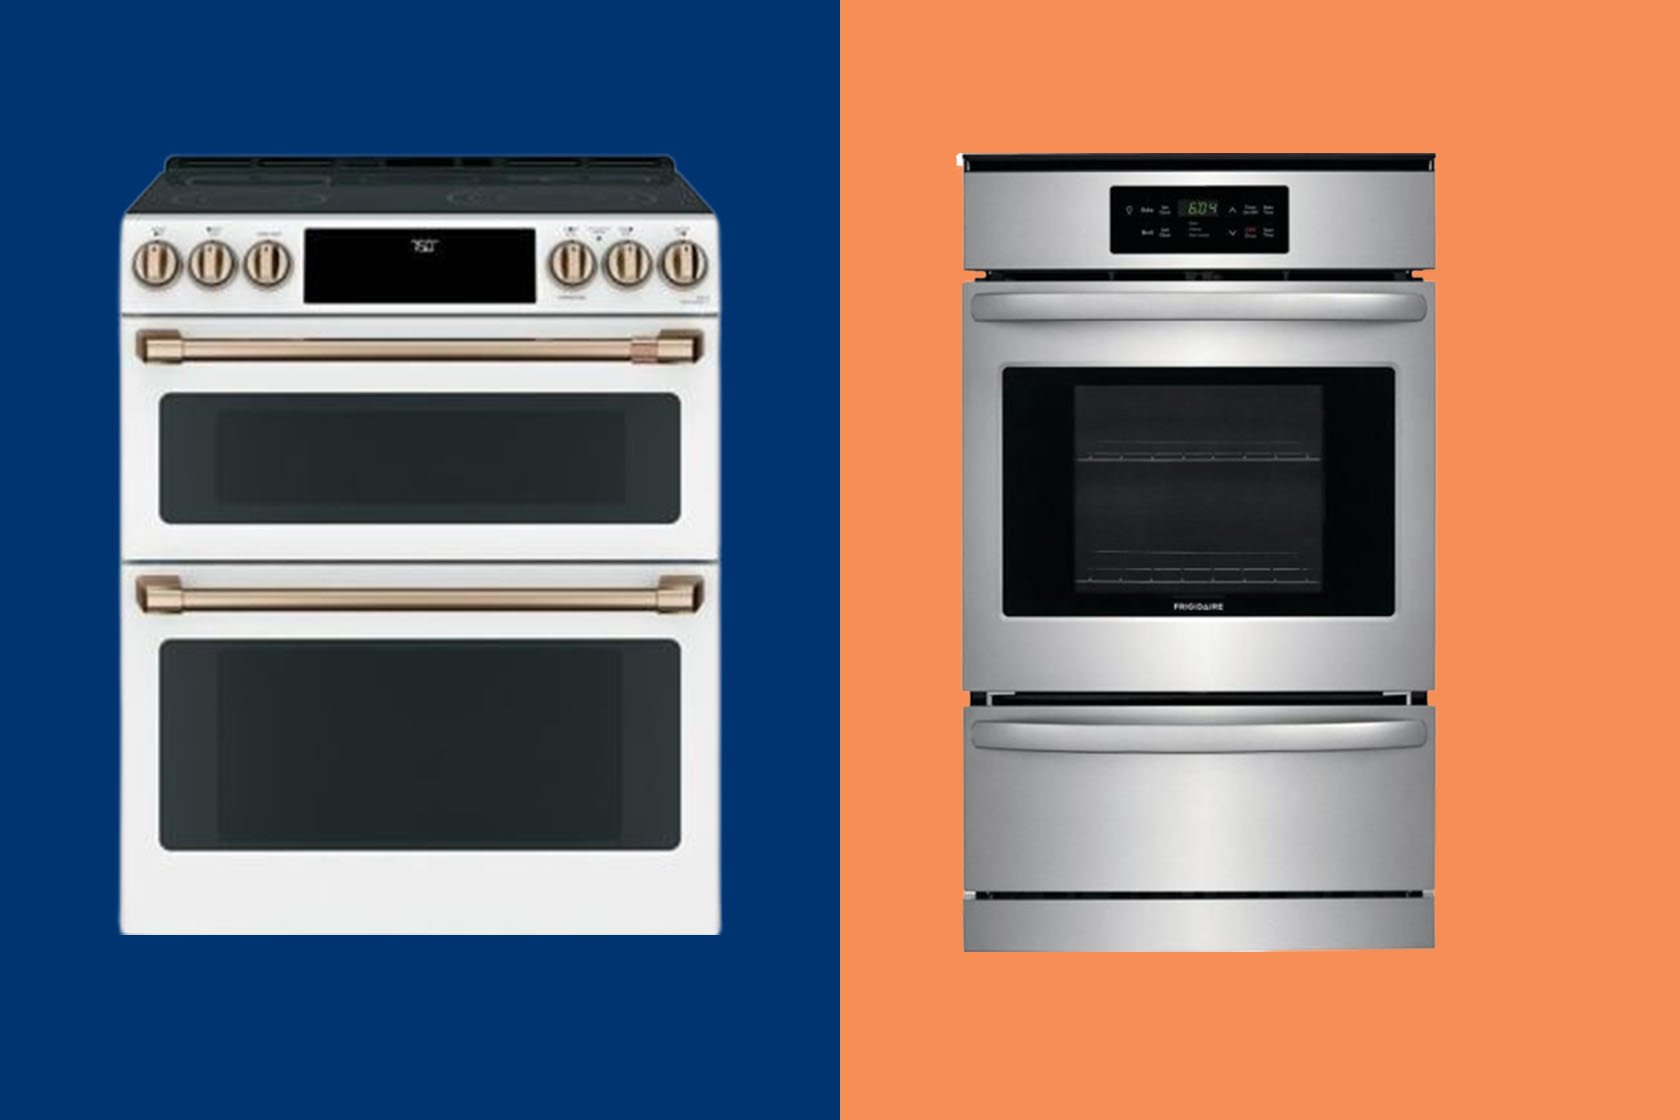 Convection vs. Conventional Ovens Compared